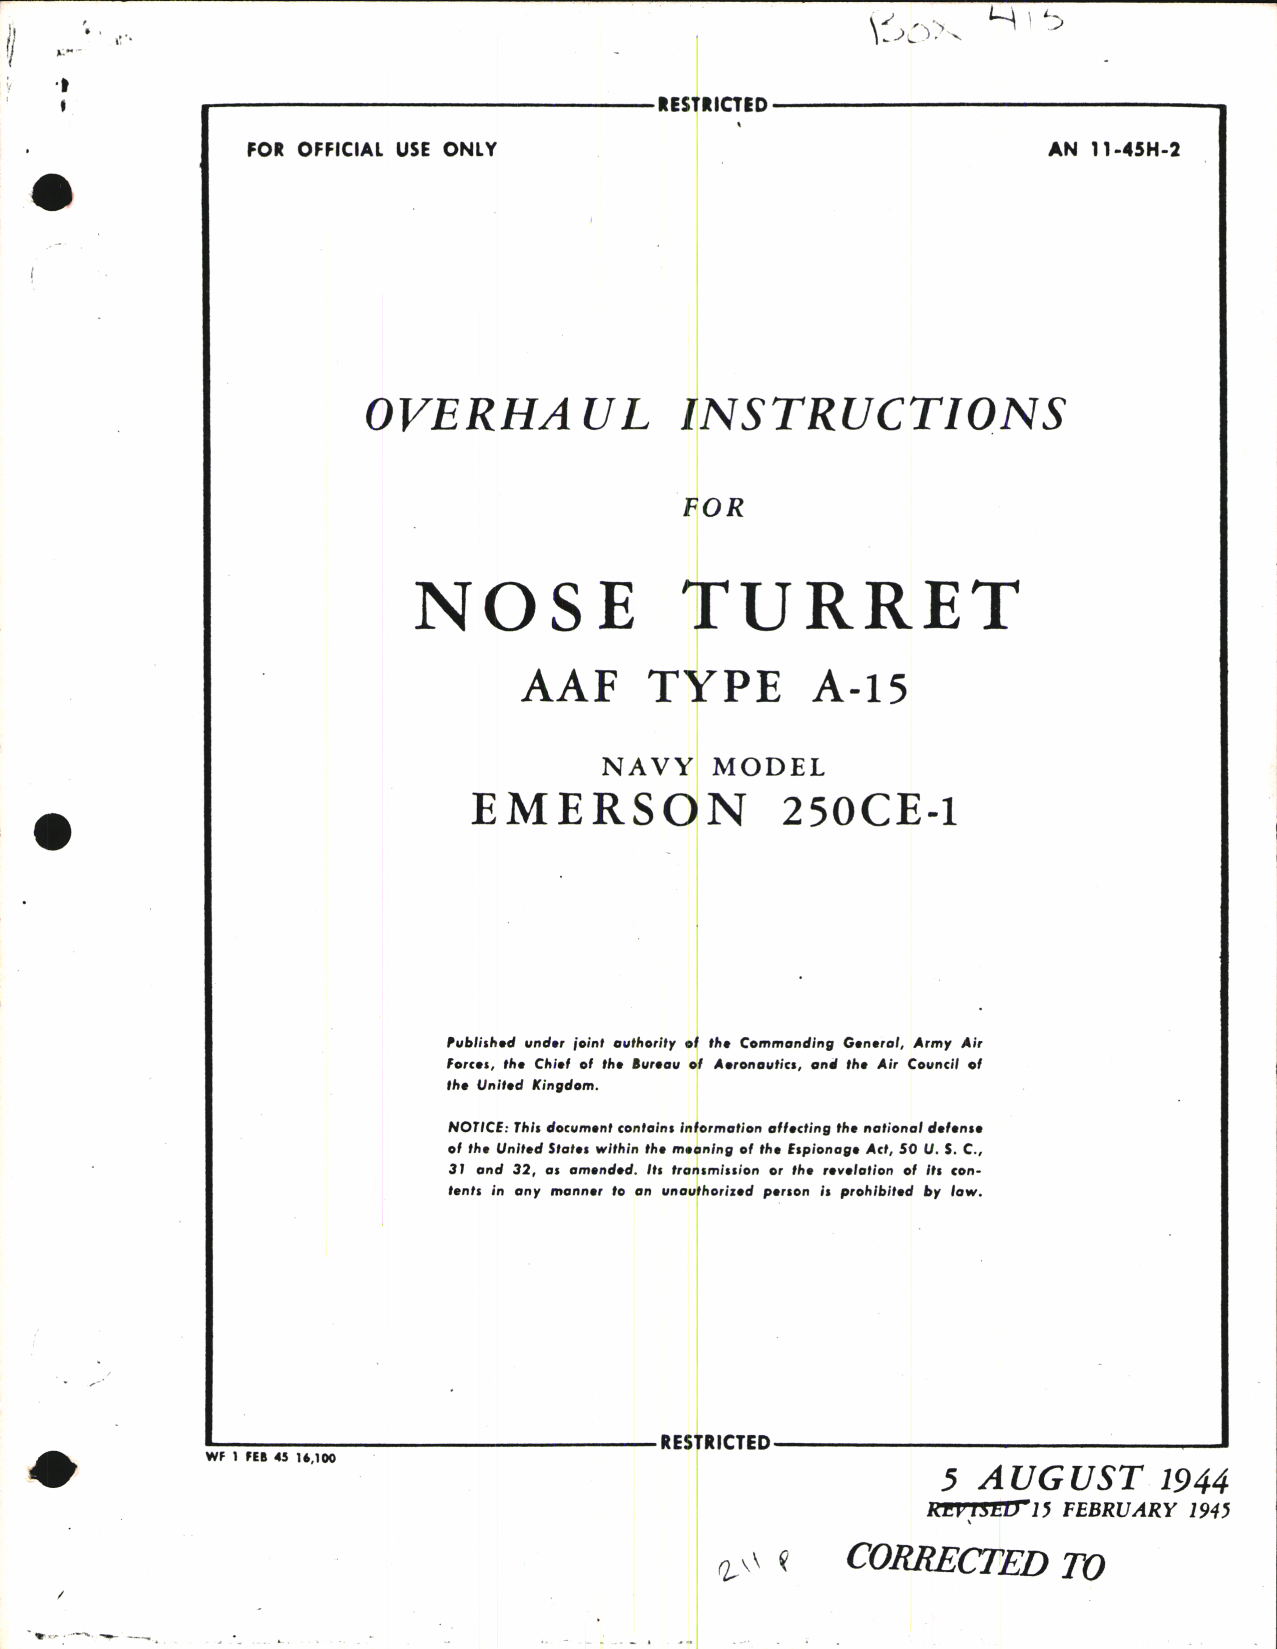 Sample page 1 from AirCorps Library document: Overhaul Instructions for Nose Turret AAF Type A-15, Navy Model 250CE-1